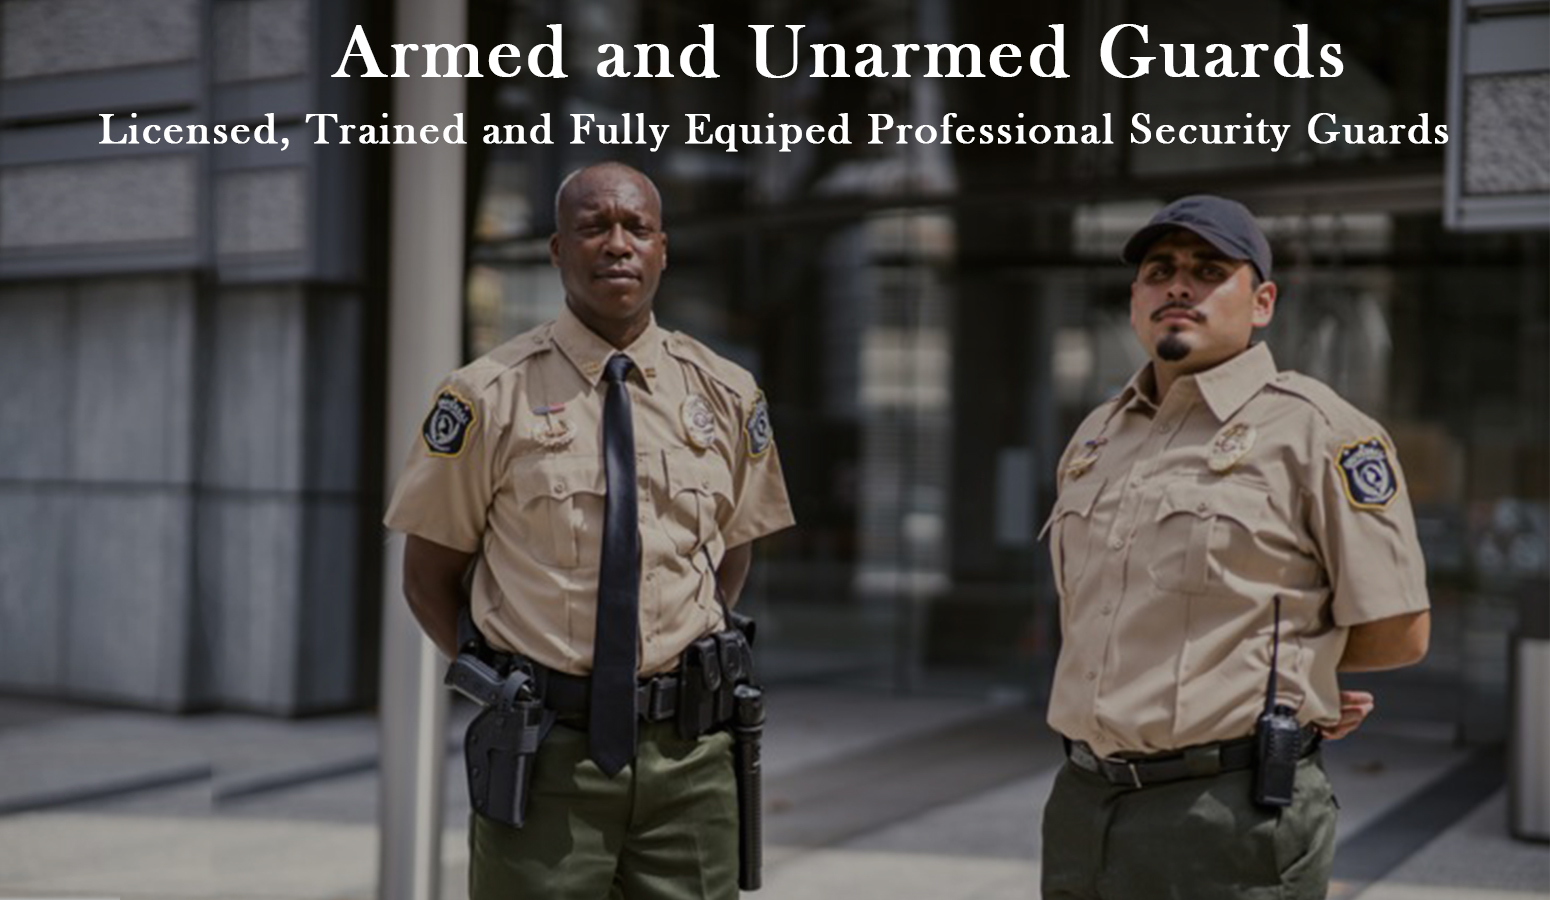 Professional Security Guards in Los Angeles